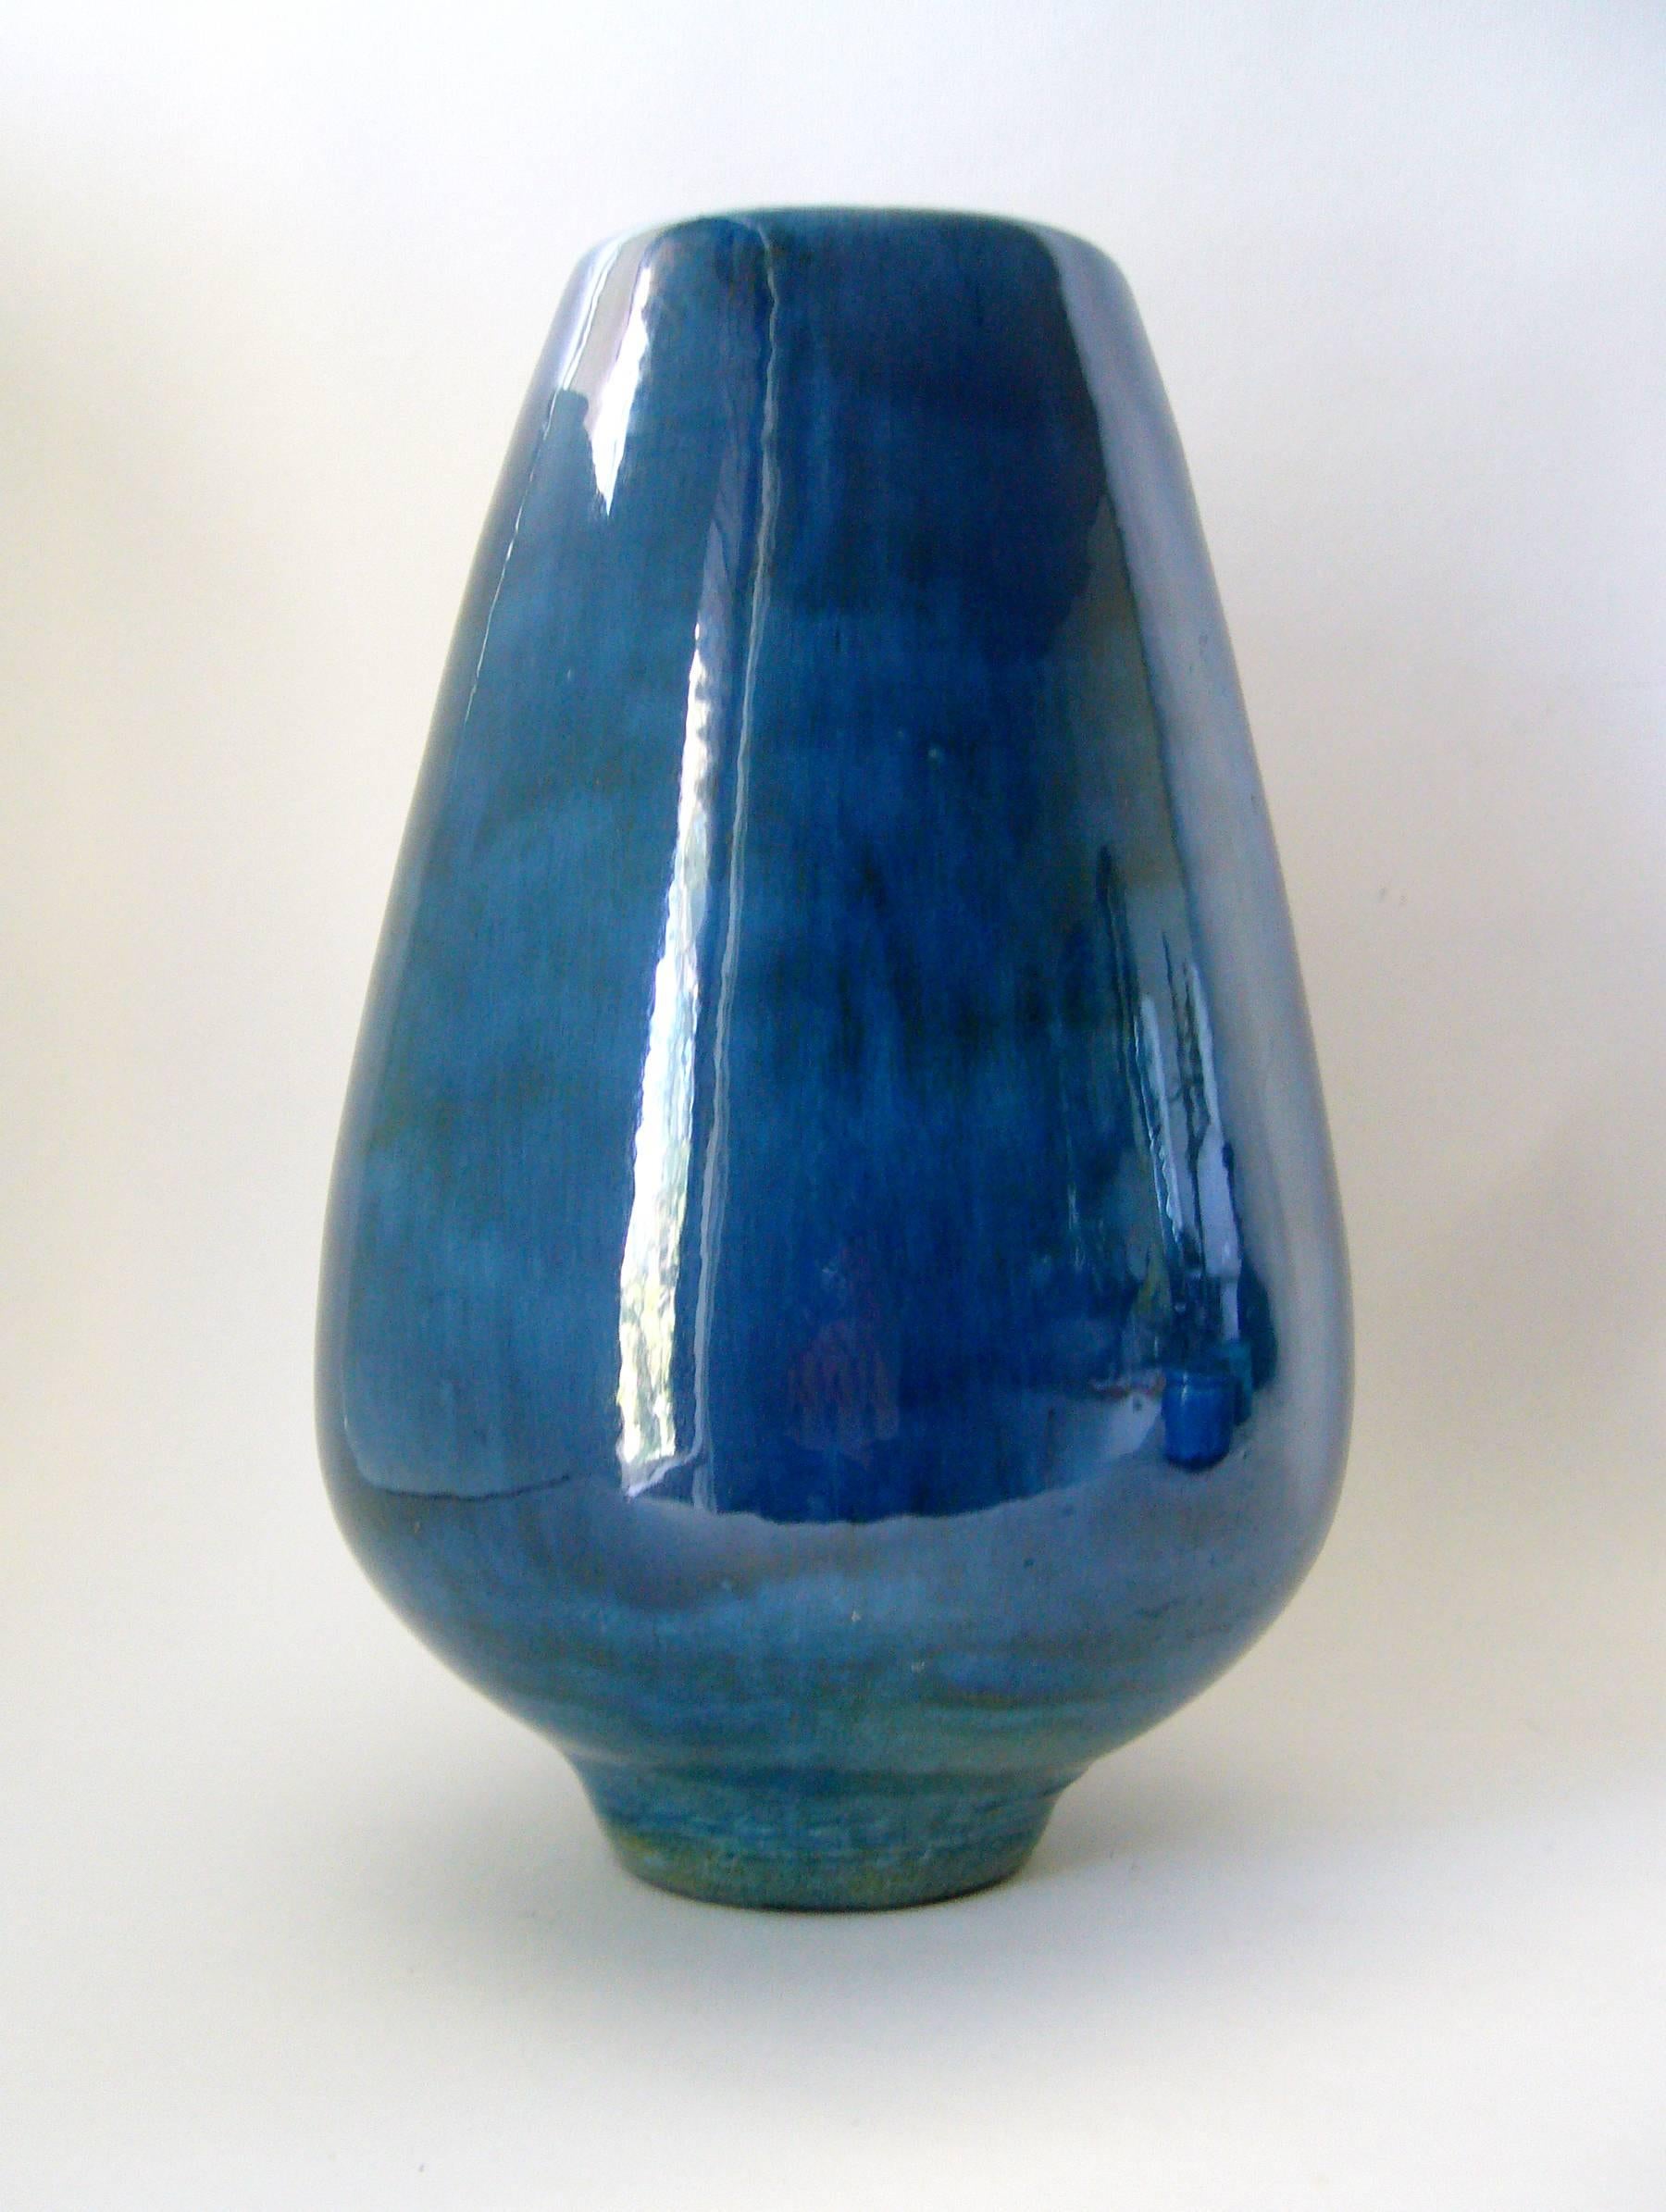 Large, bell shaped, high gloss vase created by Polia and William Pillin of Los Angeles, California. Vase measures 11.5" in height and 7" at its widest measurement. signed W + P Pillin and in very good vintage condition.